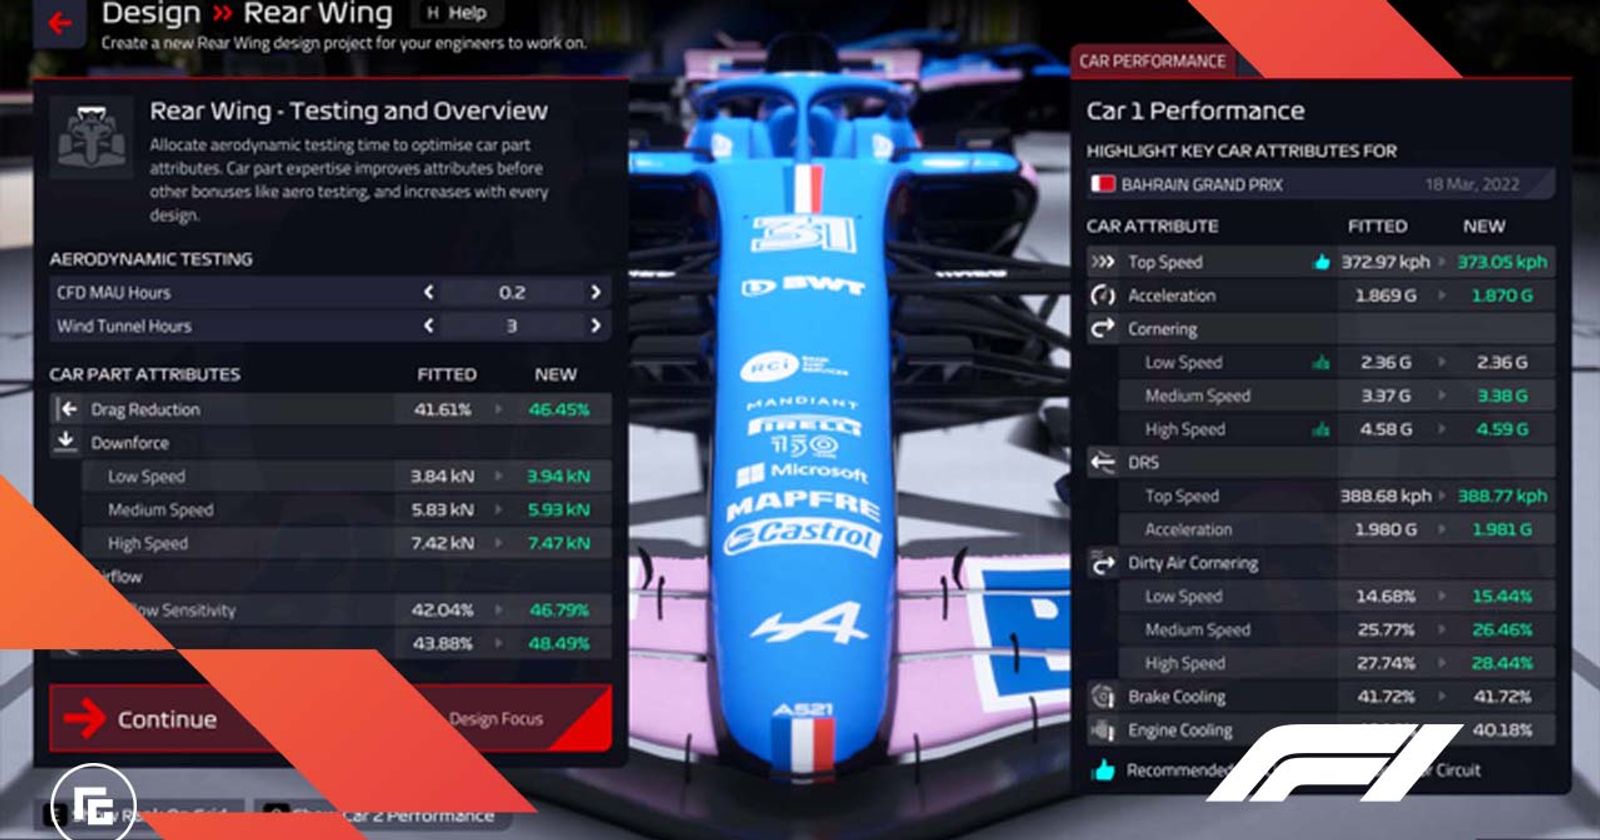 F1® Manager 2022  Official Launch Trailer 